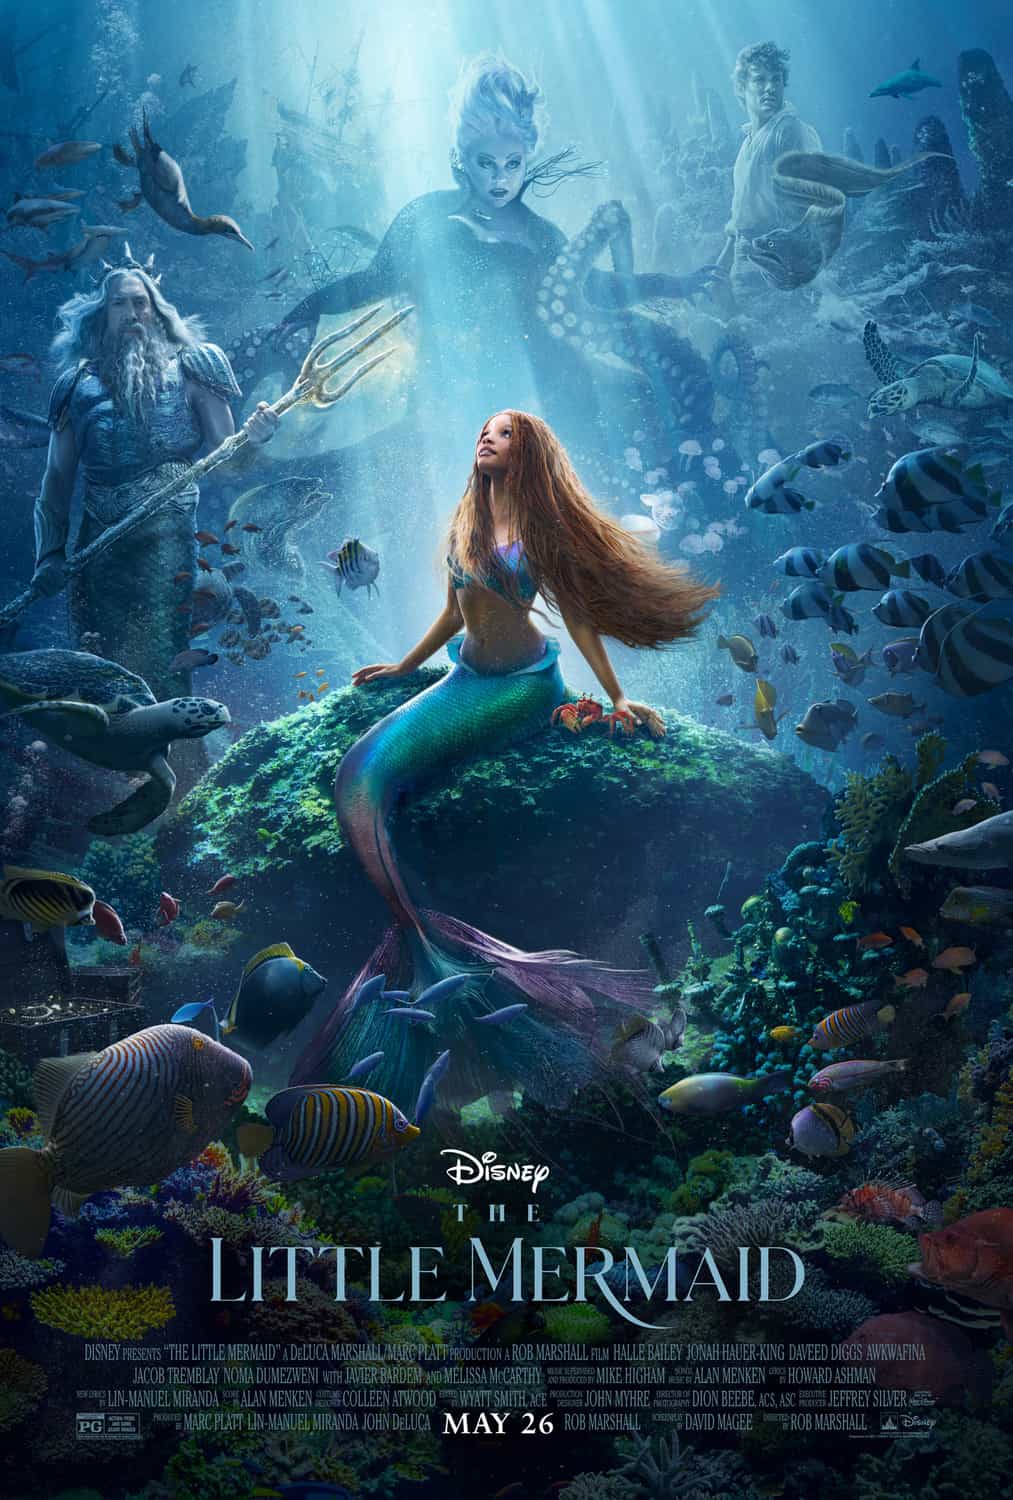 New poster released for The Little Mermaid starring Halle Bailey - movie UK release date 26th May 2023 #thelittlemermaid